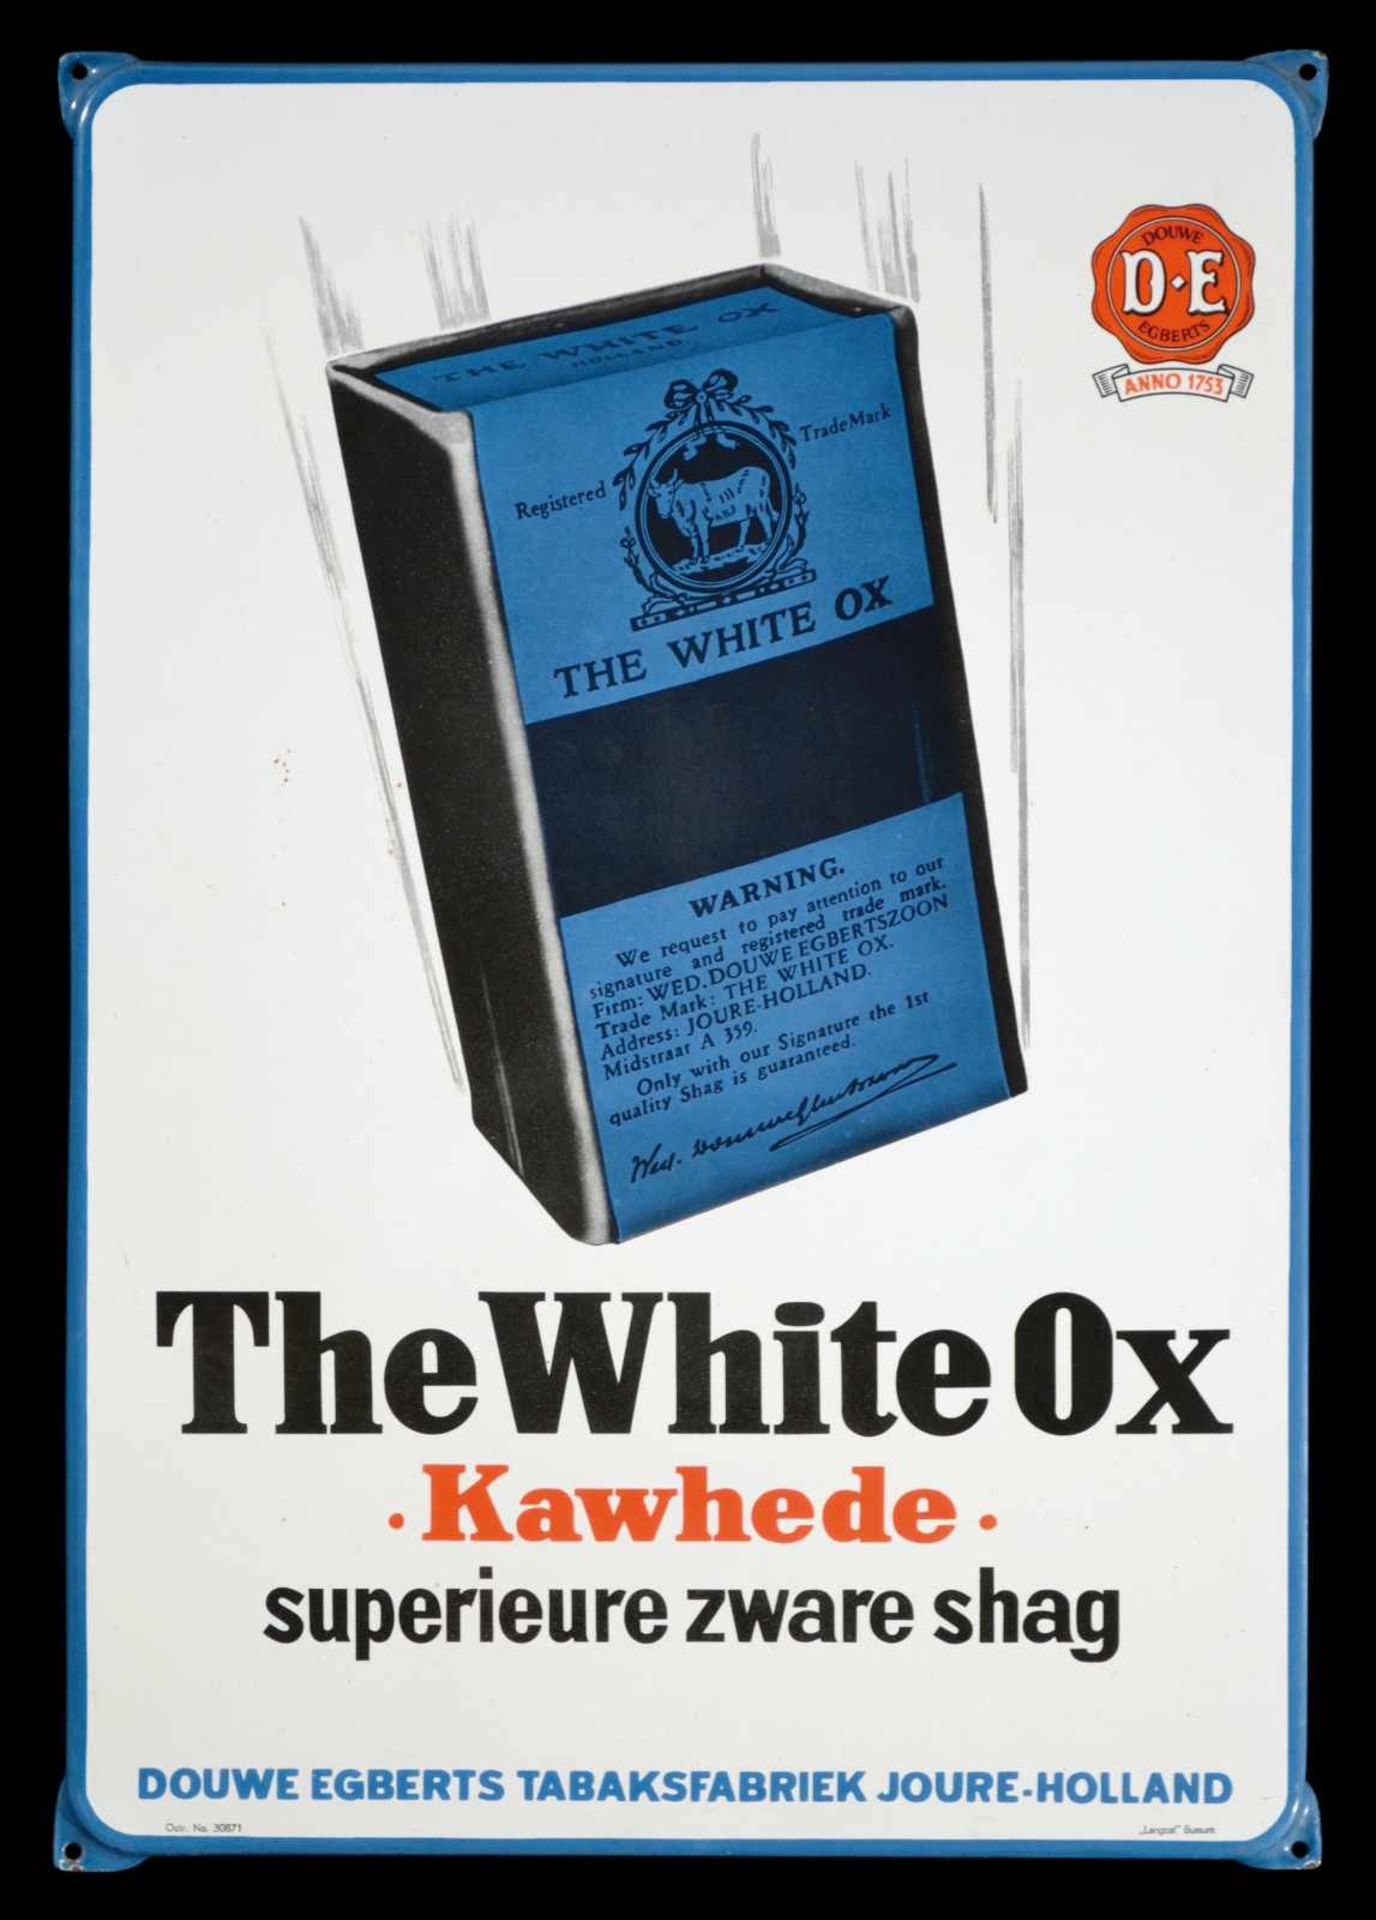 THE WHITE OX - KAWHEDE (0) Emailschild, abgekantet, schabloniert und lithographiert, Joure/